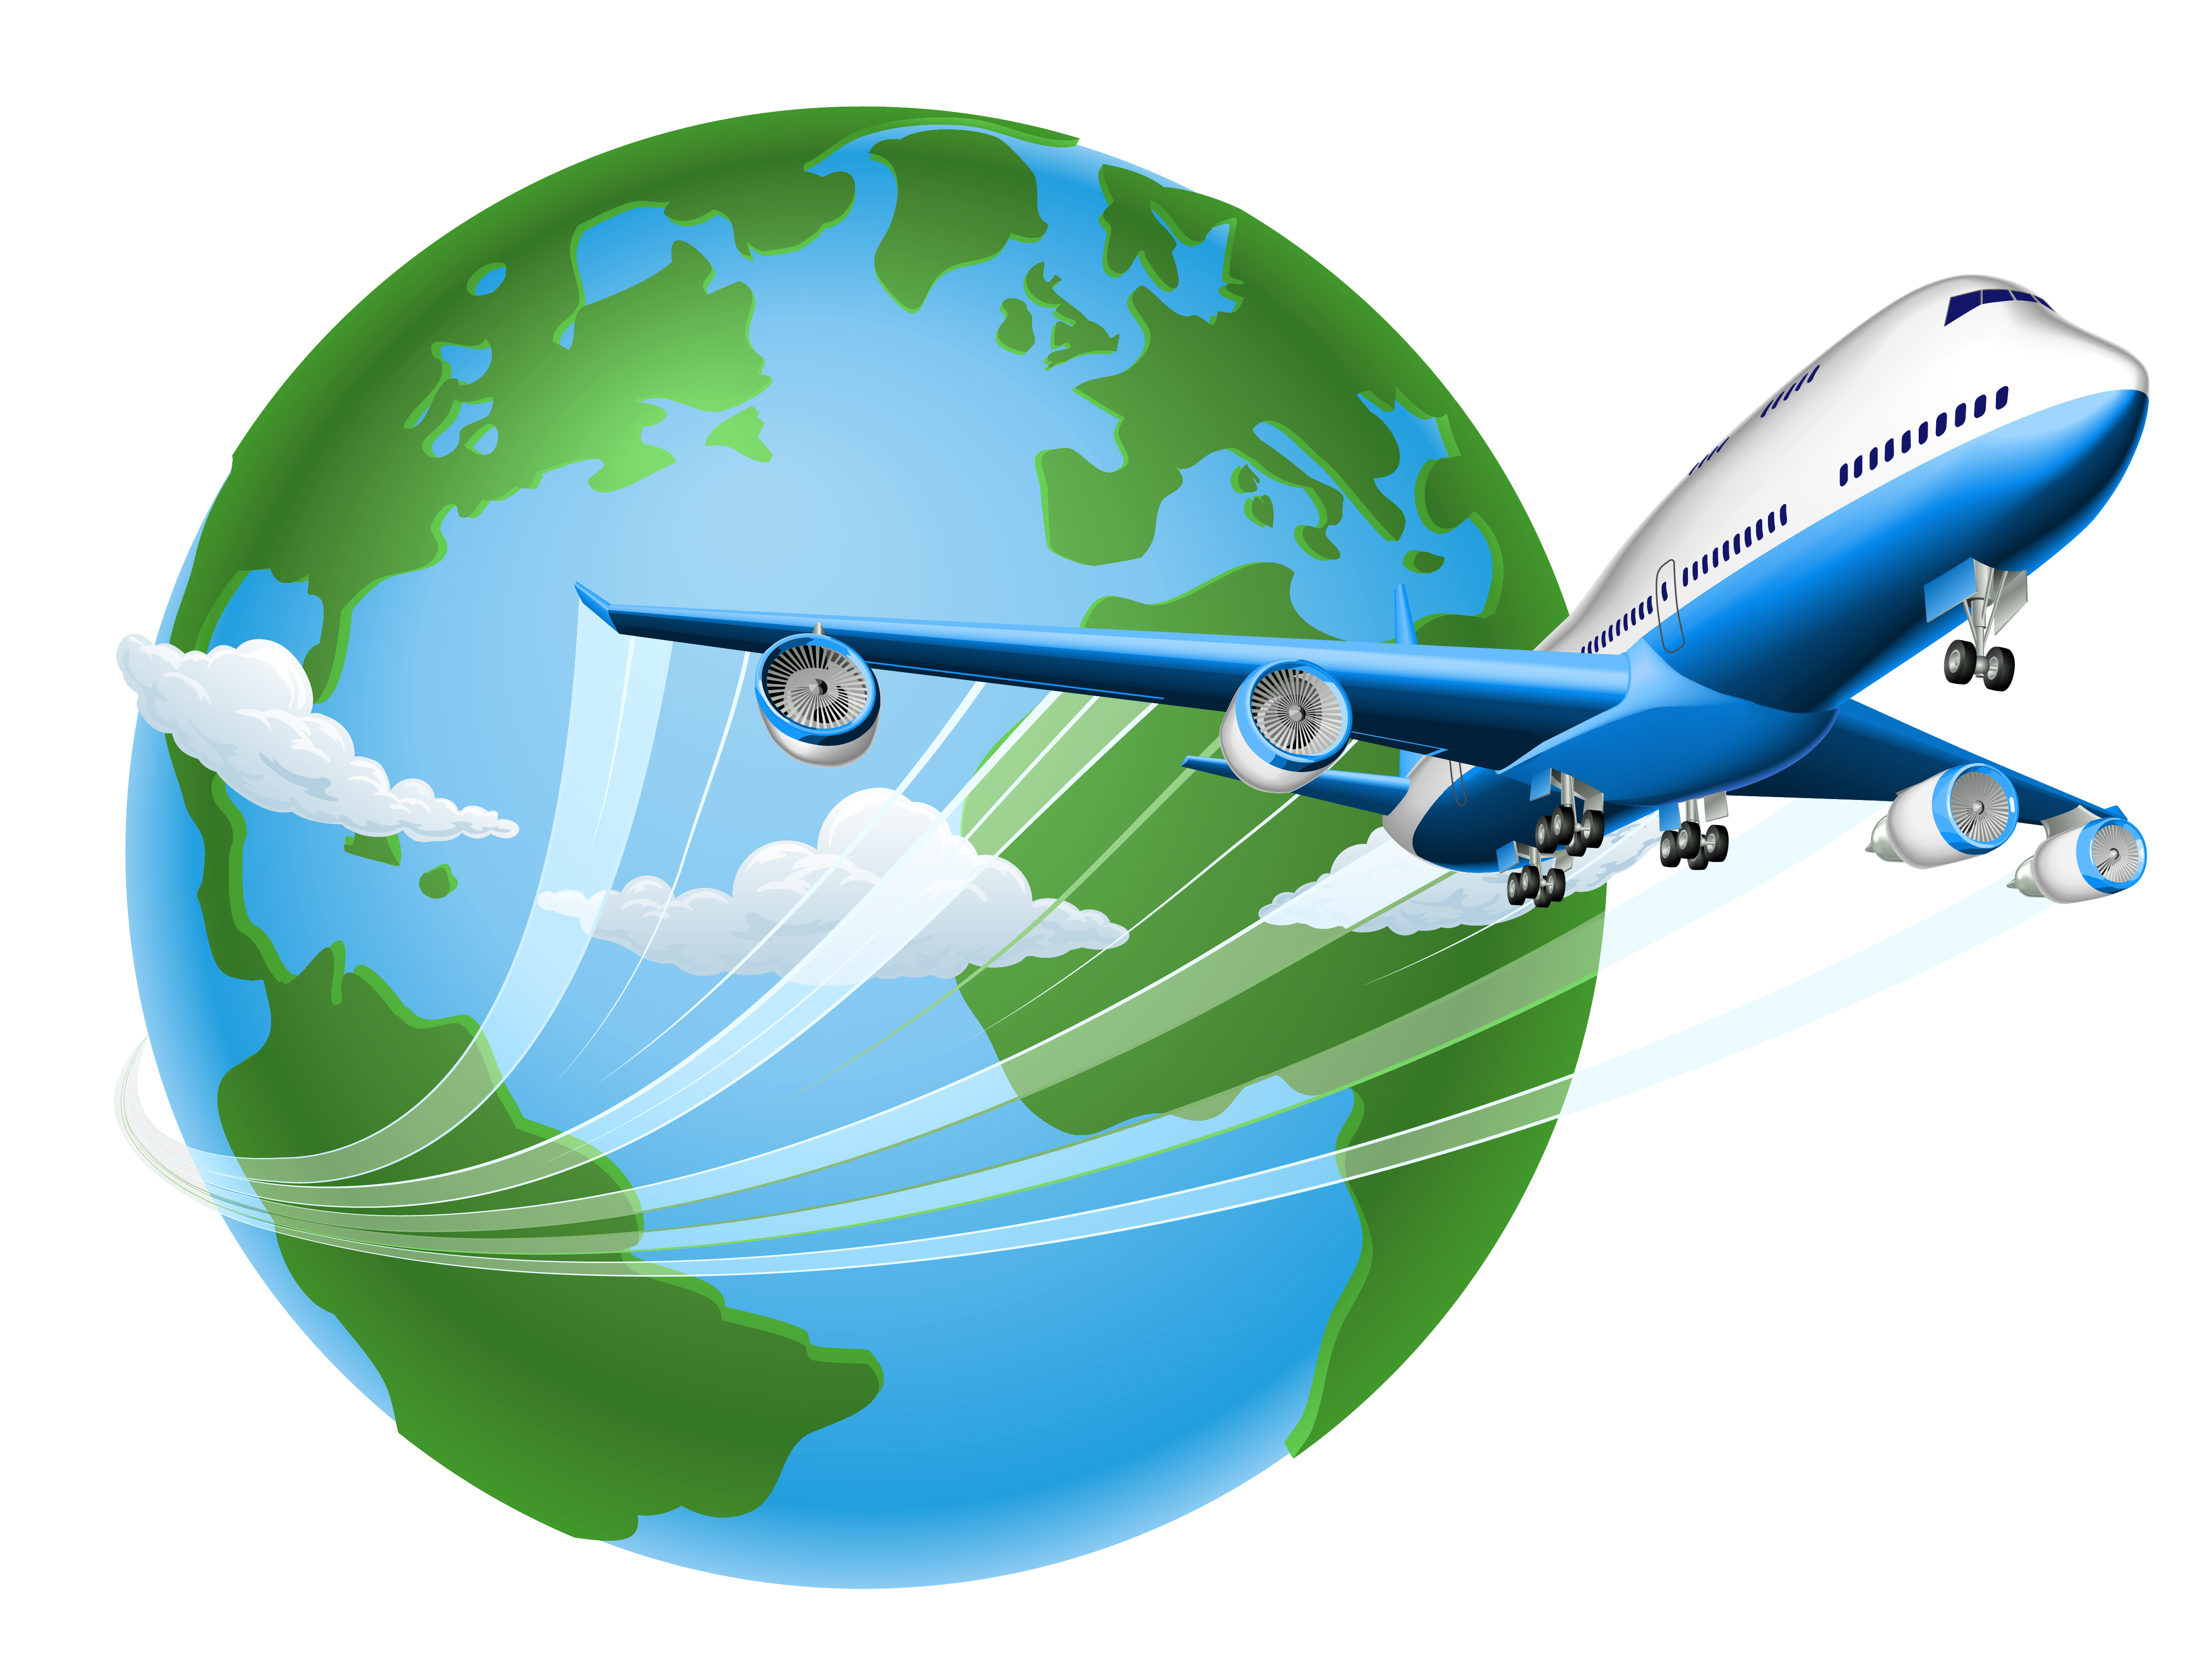 travel abroad clipart - photo #21